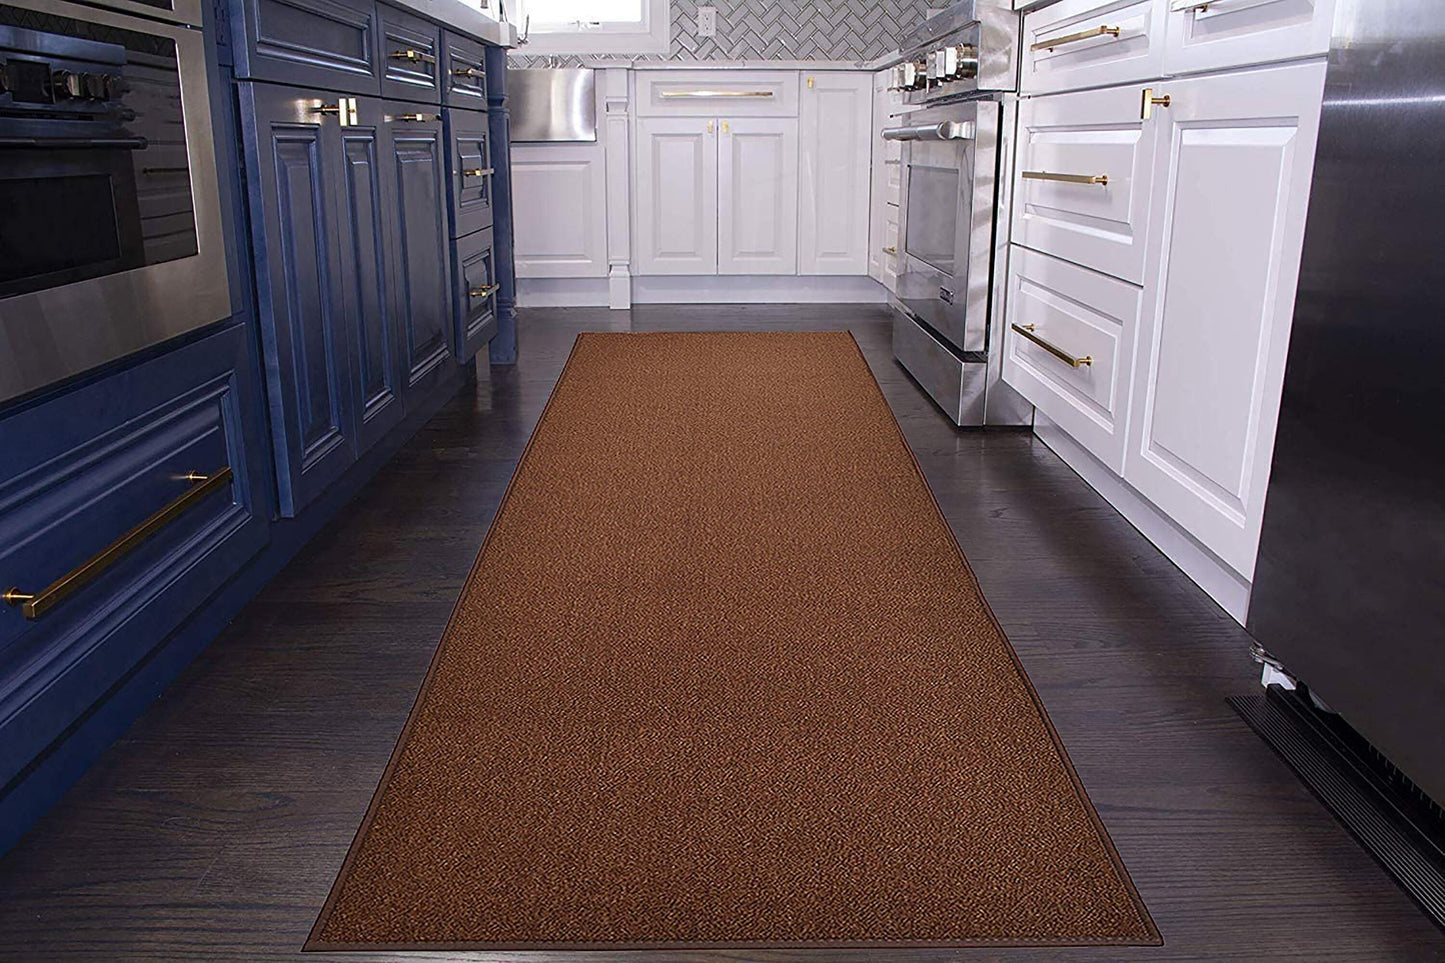 Custom Size Runner Rug Solid Brown Roll Runner 32 Inch Wide x Your Length Size Choice Skid Resistant Rubber Back Pick Your Own Size